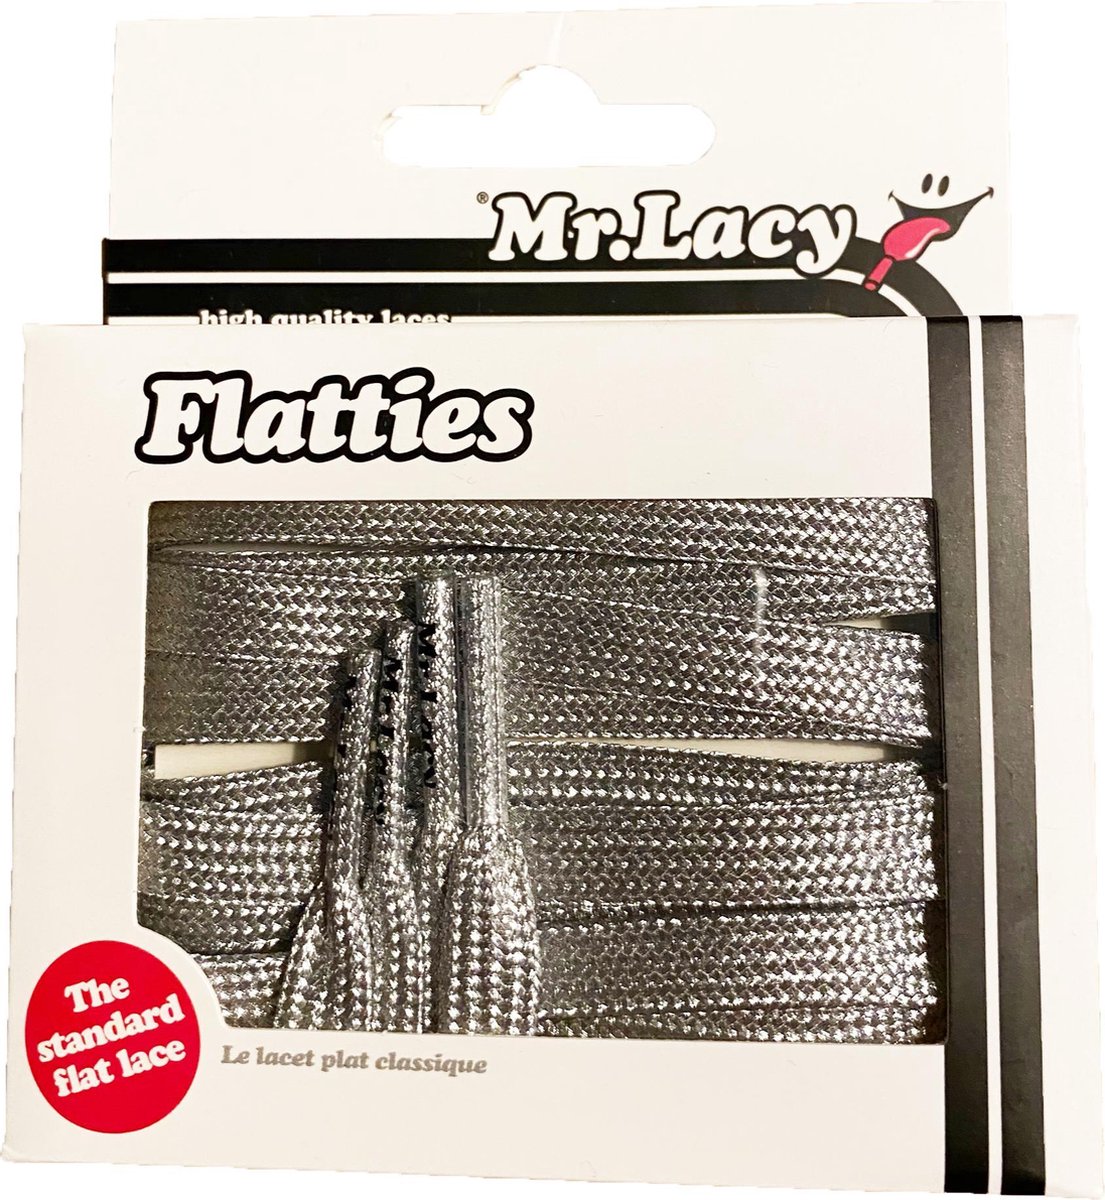 Mr Lacy flatties silver special edition 130cm lang 10 mm breed extra sterk